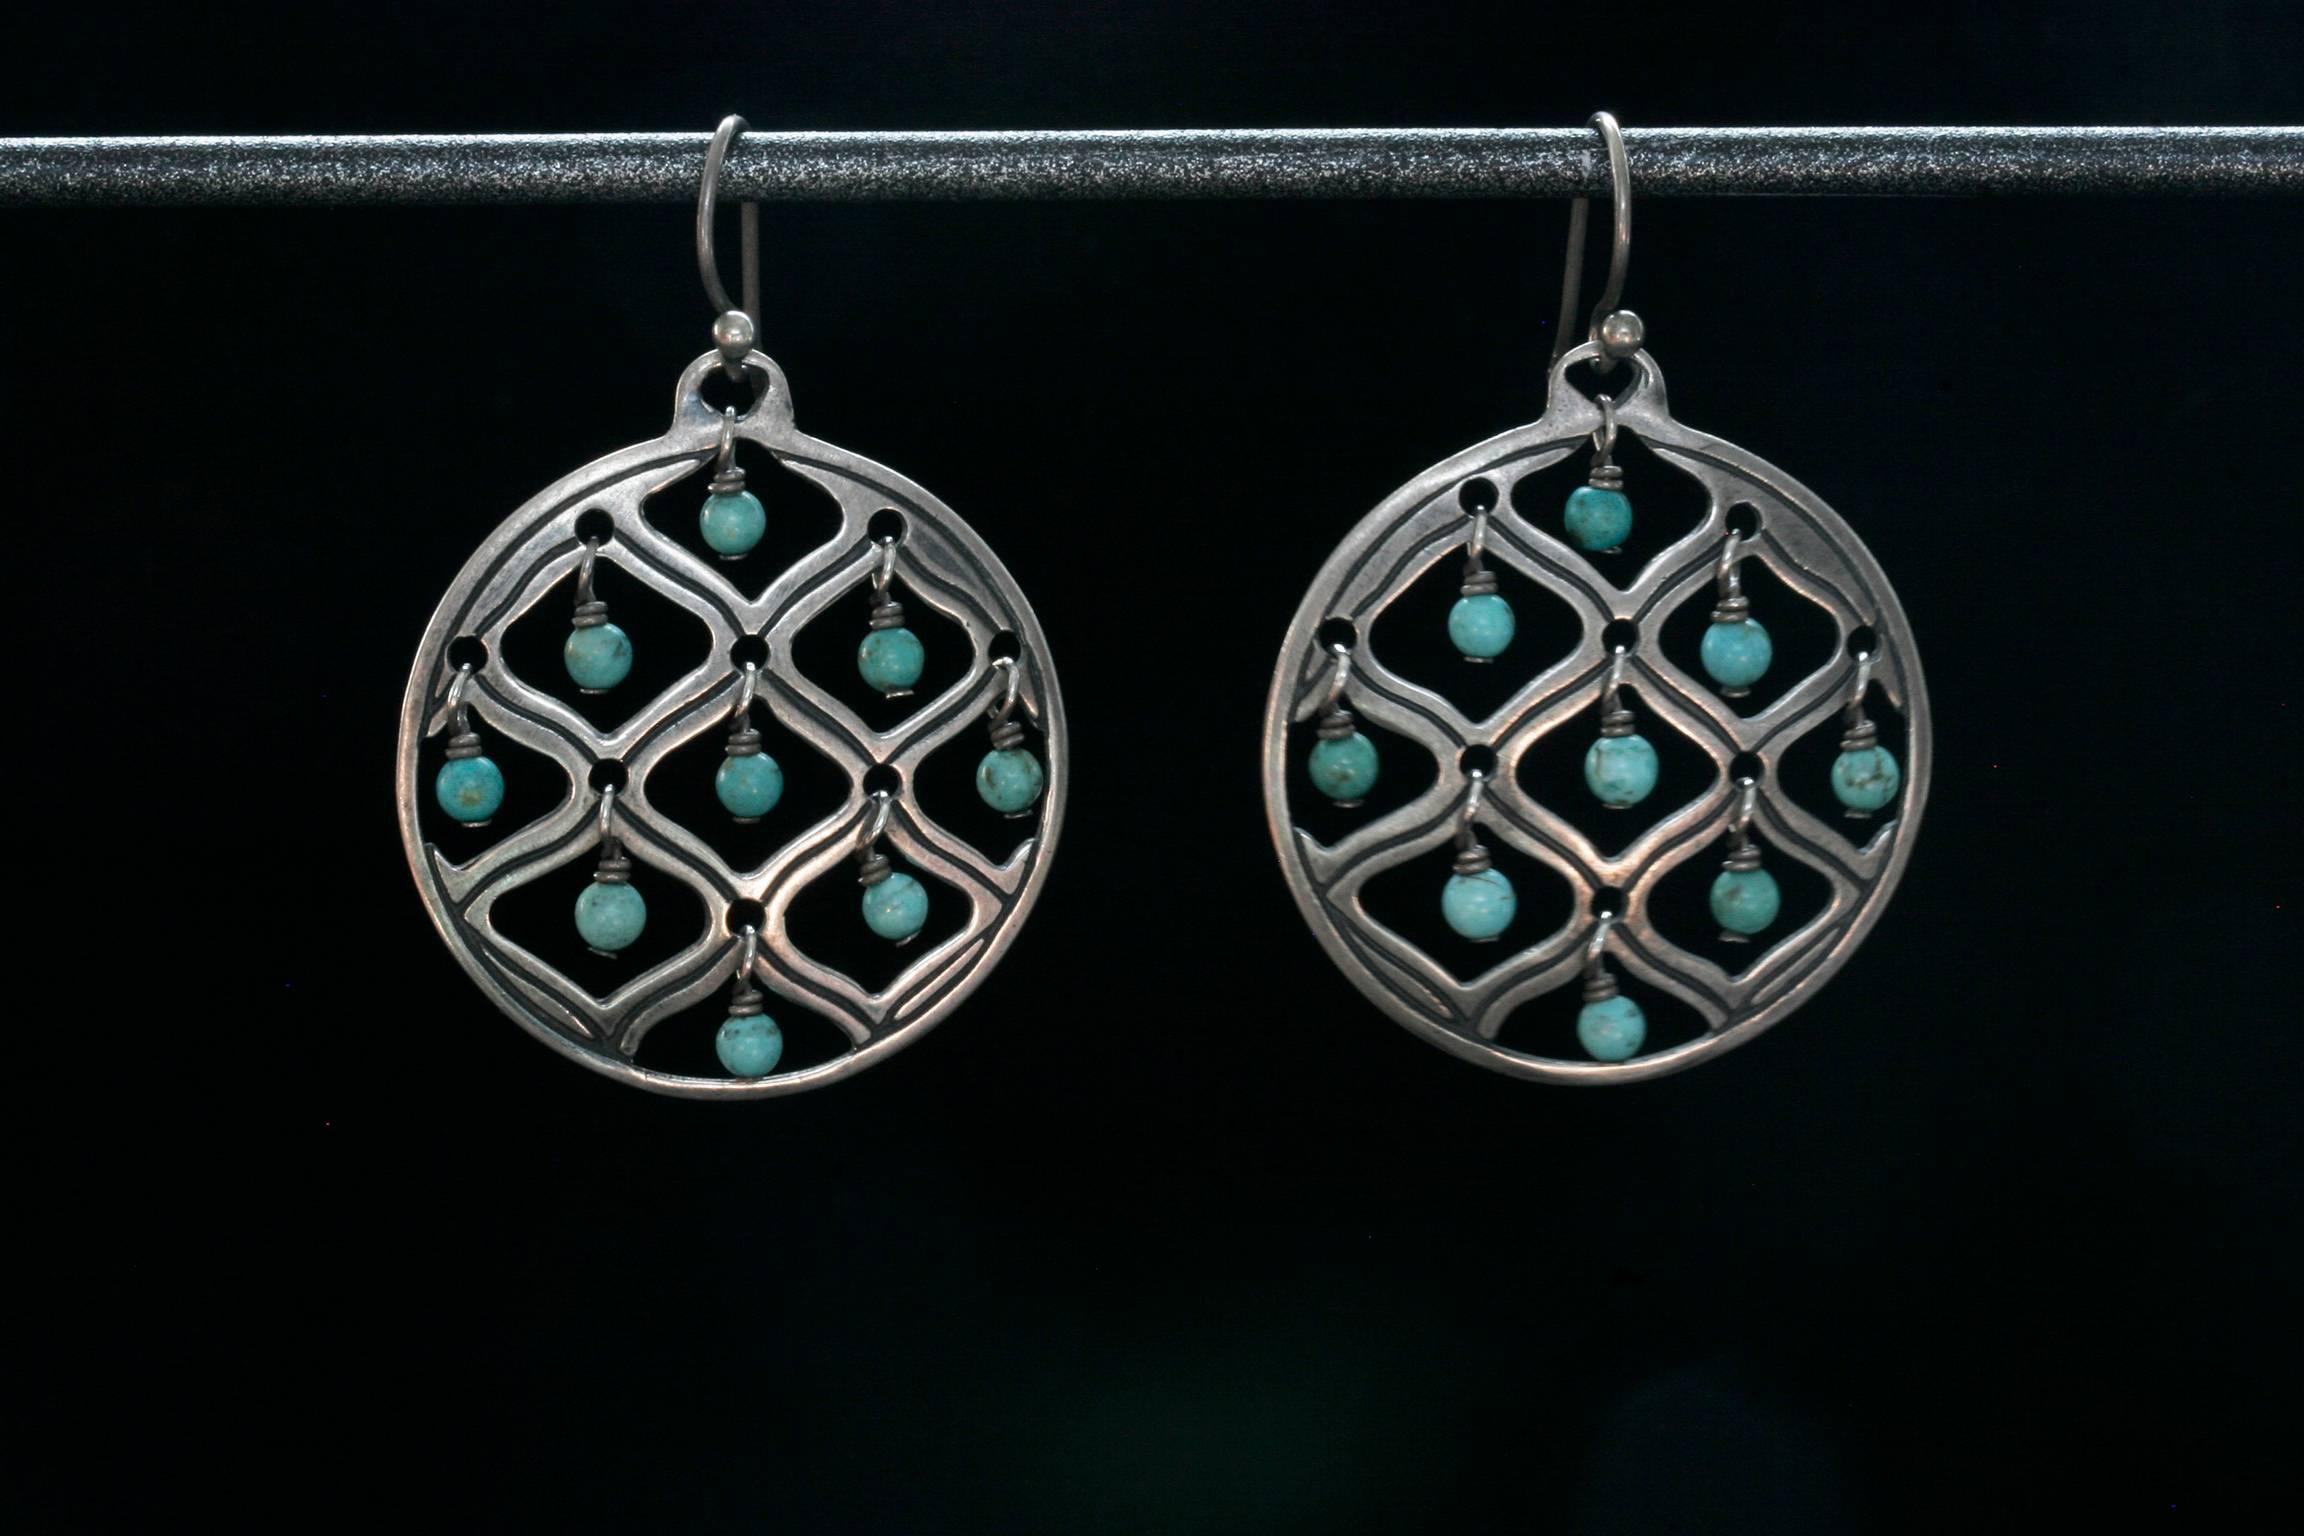 A truly unique vintage sterling silver turquoise drop earrings. Each earring has nine tiny turquoise drops hanging from a round silver frame. Earrings give great movement when worn, and are lightweight. The color disparity in turquoise is natural.